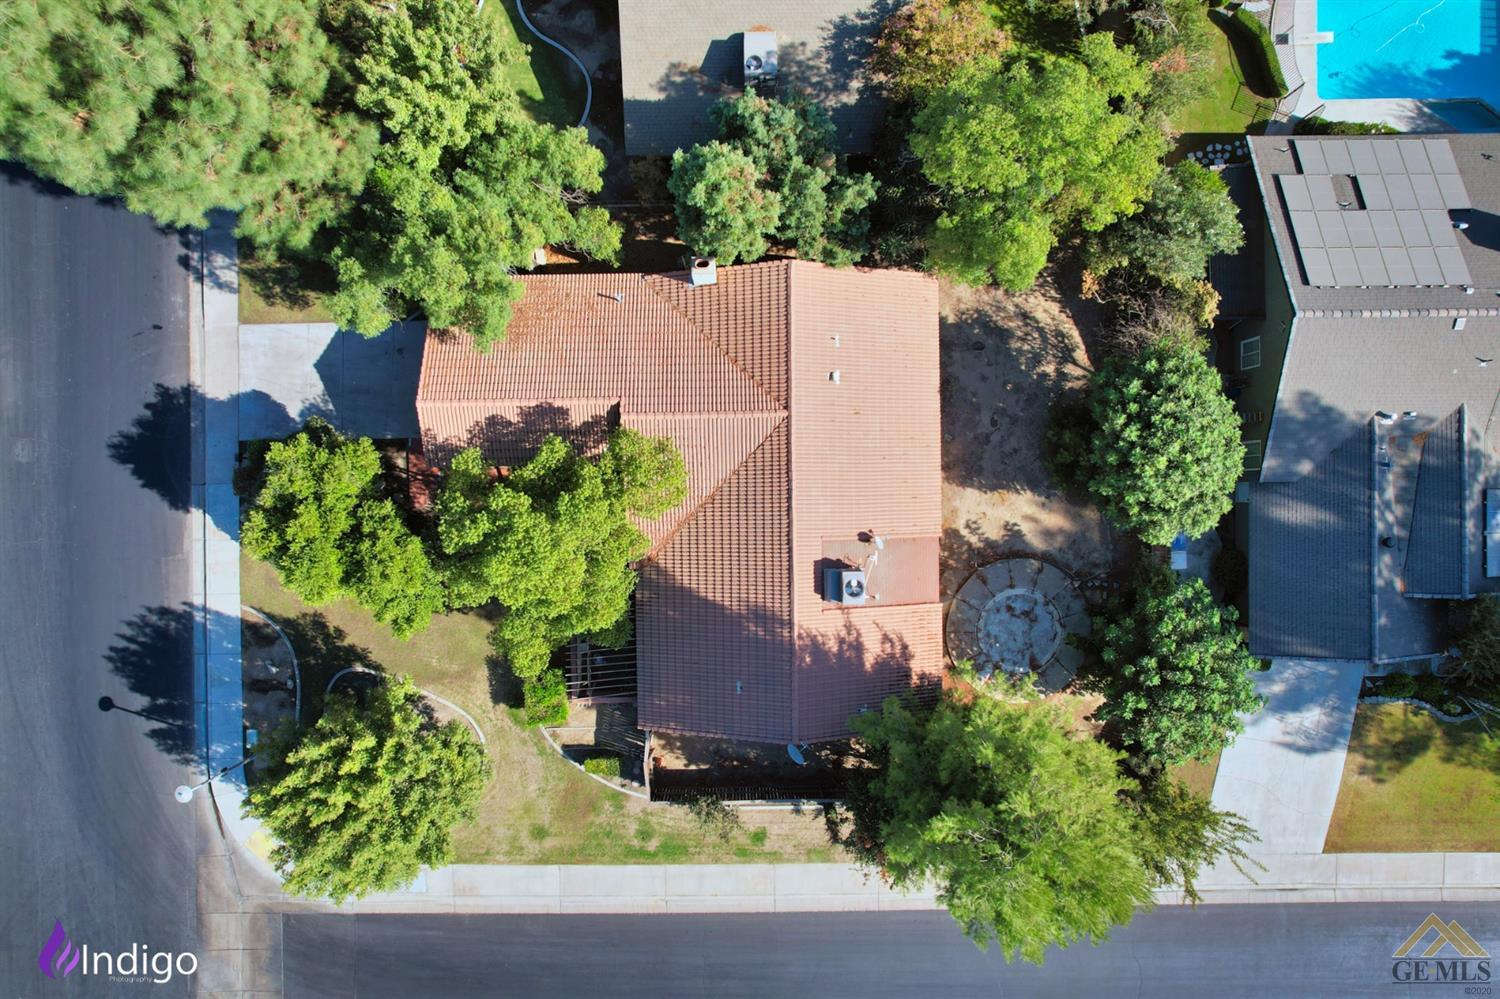 an aerial view of a house with a yard outdoor seating